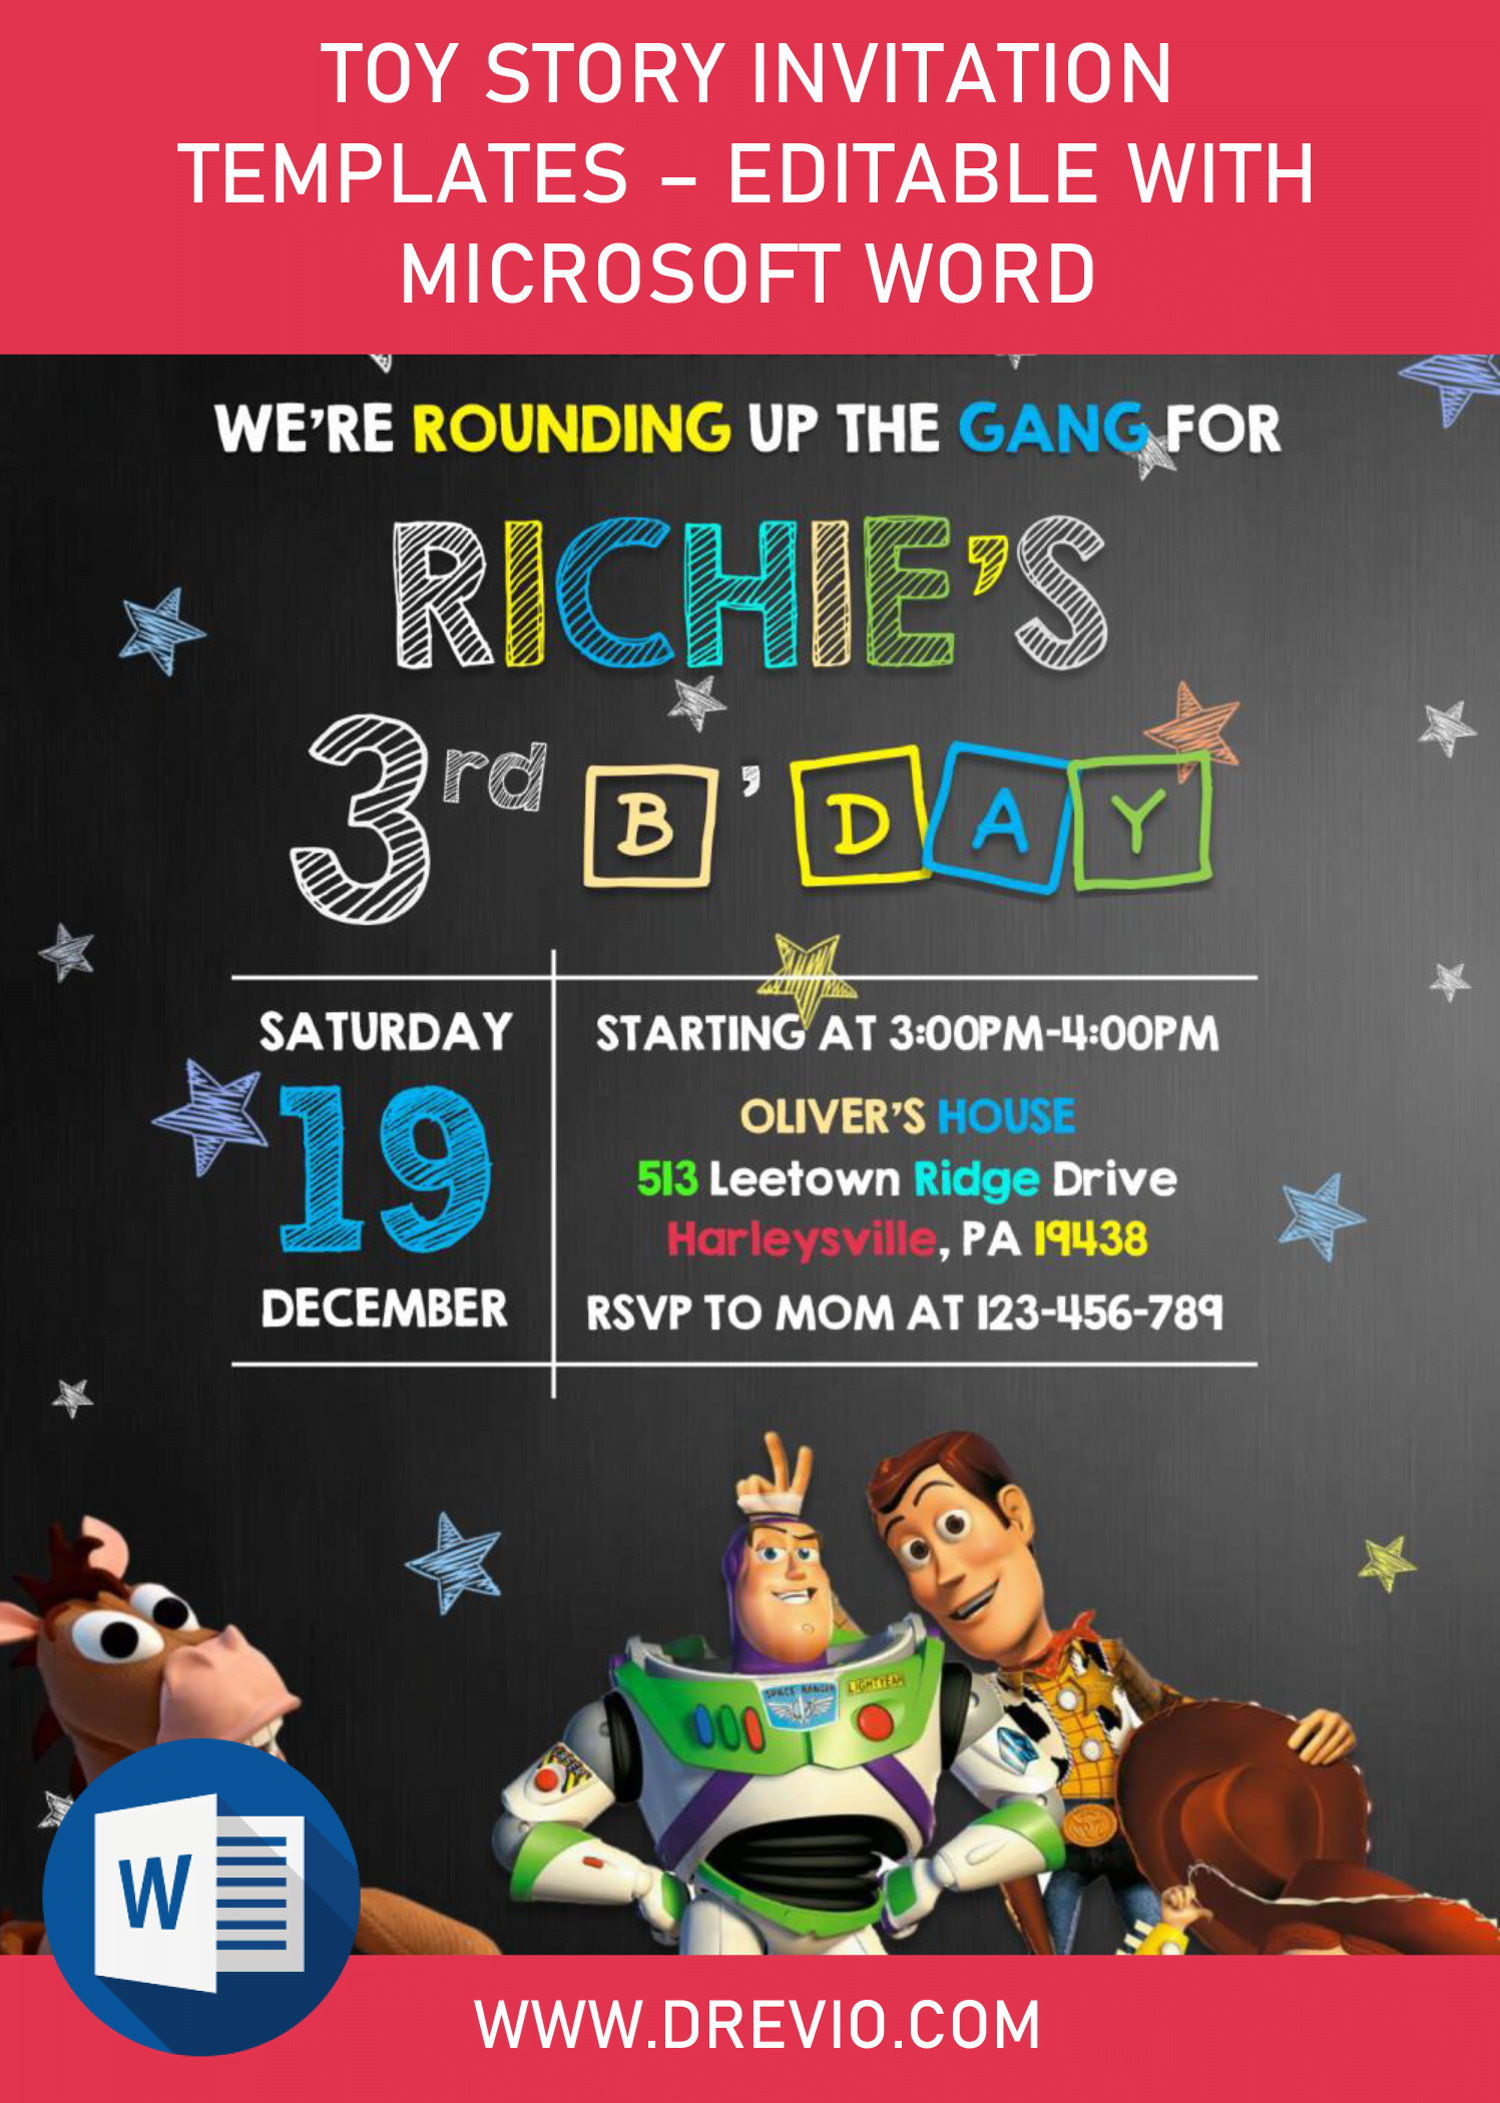 Toy Story Invitation Templates - Editable With Microsoft Word